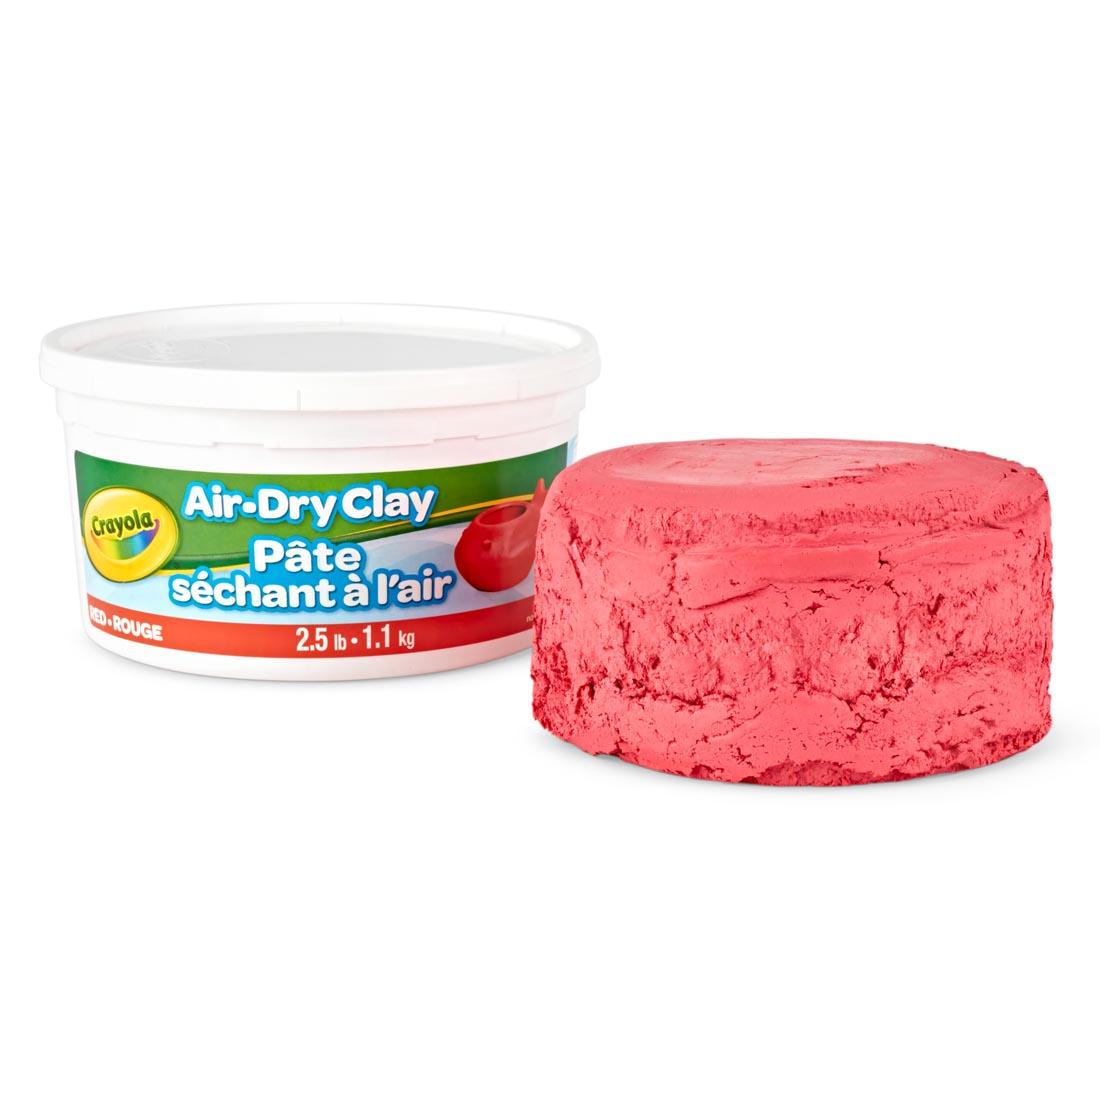 Lump of Red Crayola Air-Dry Clay beside its container